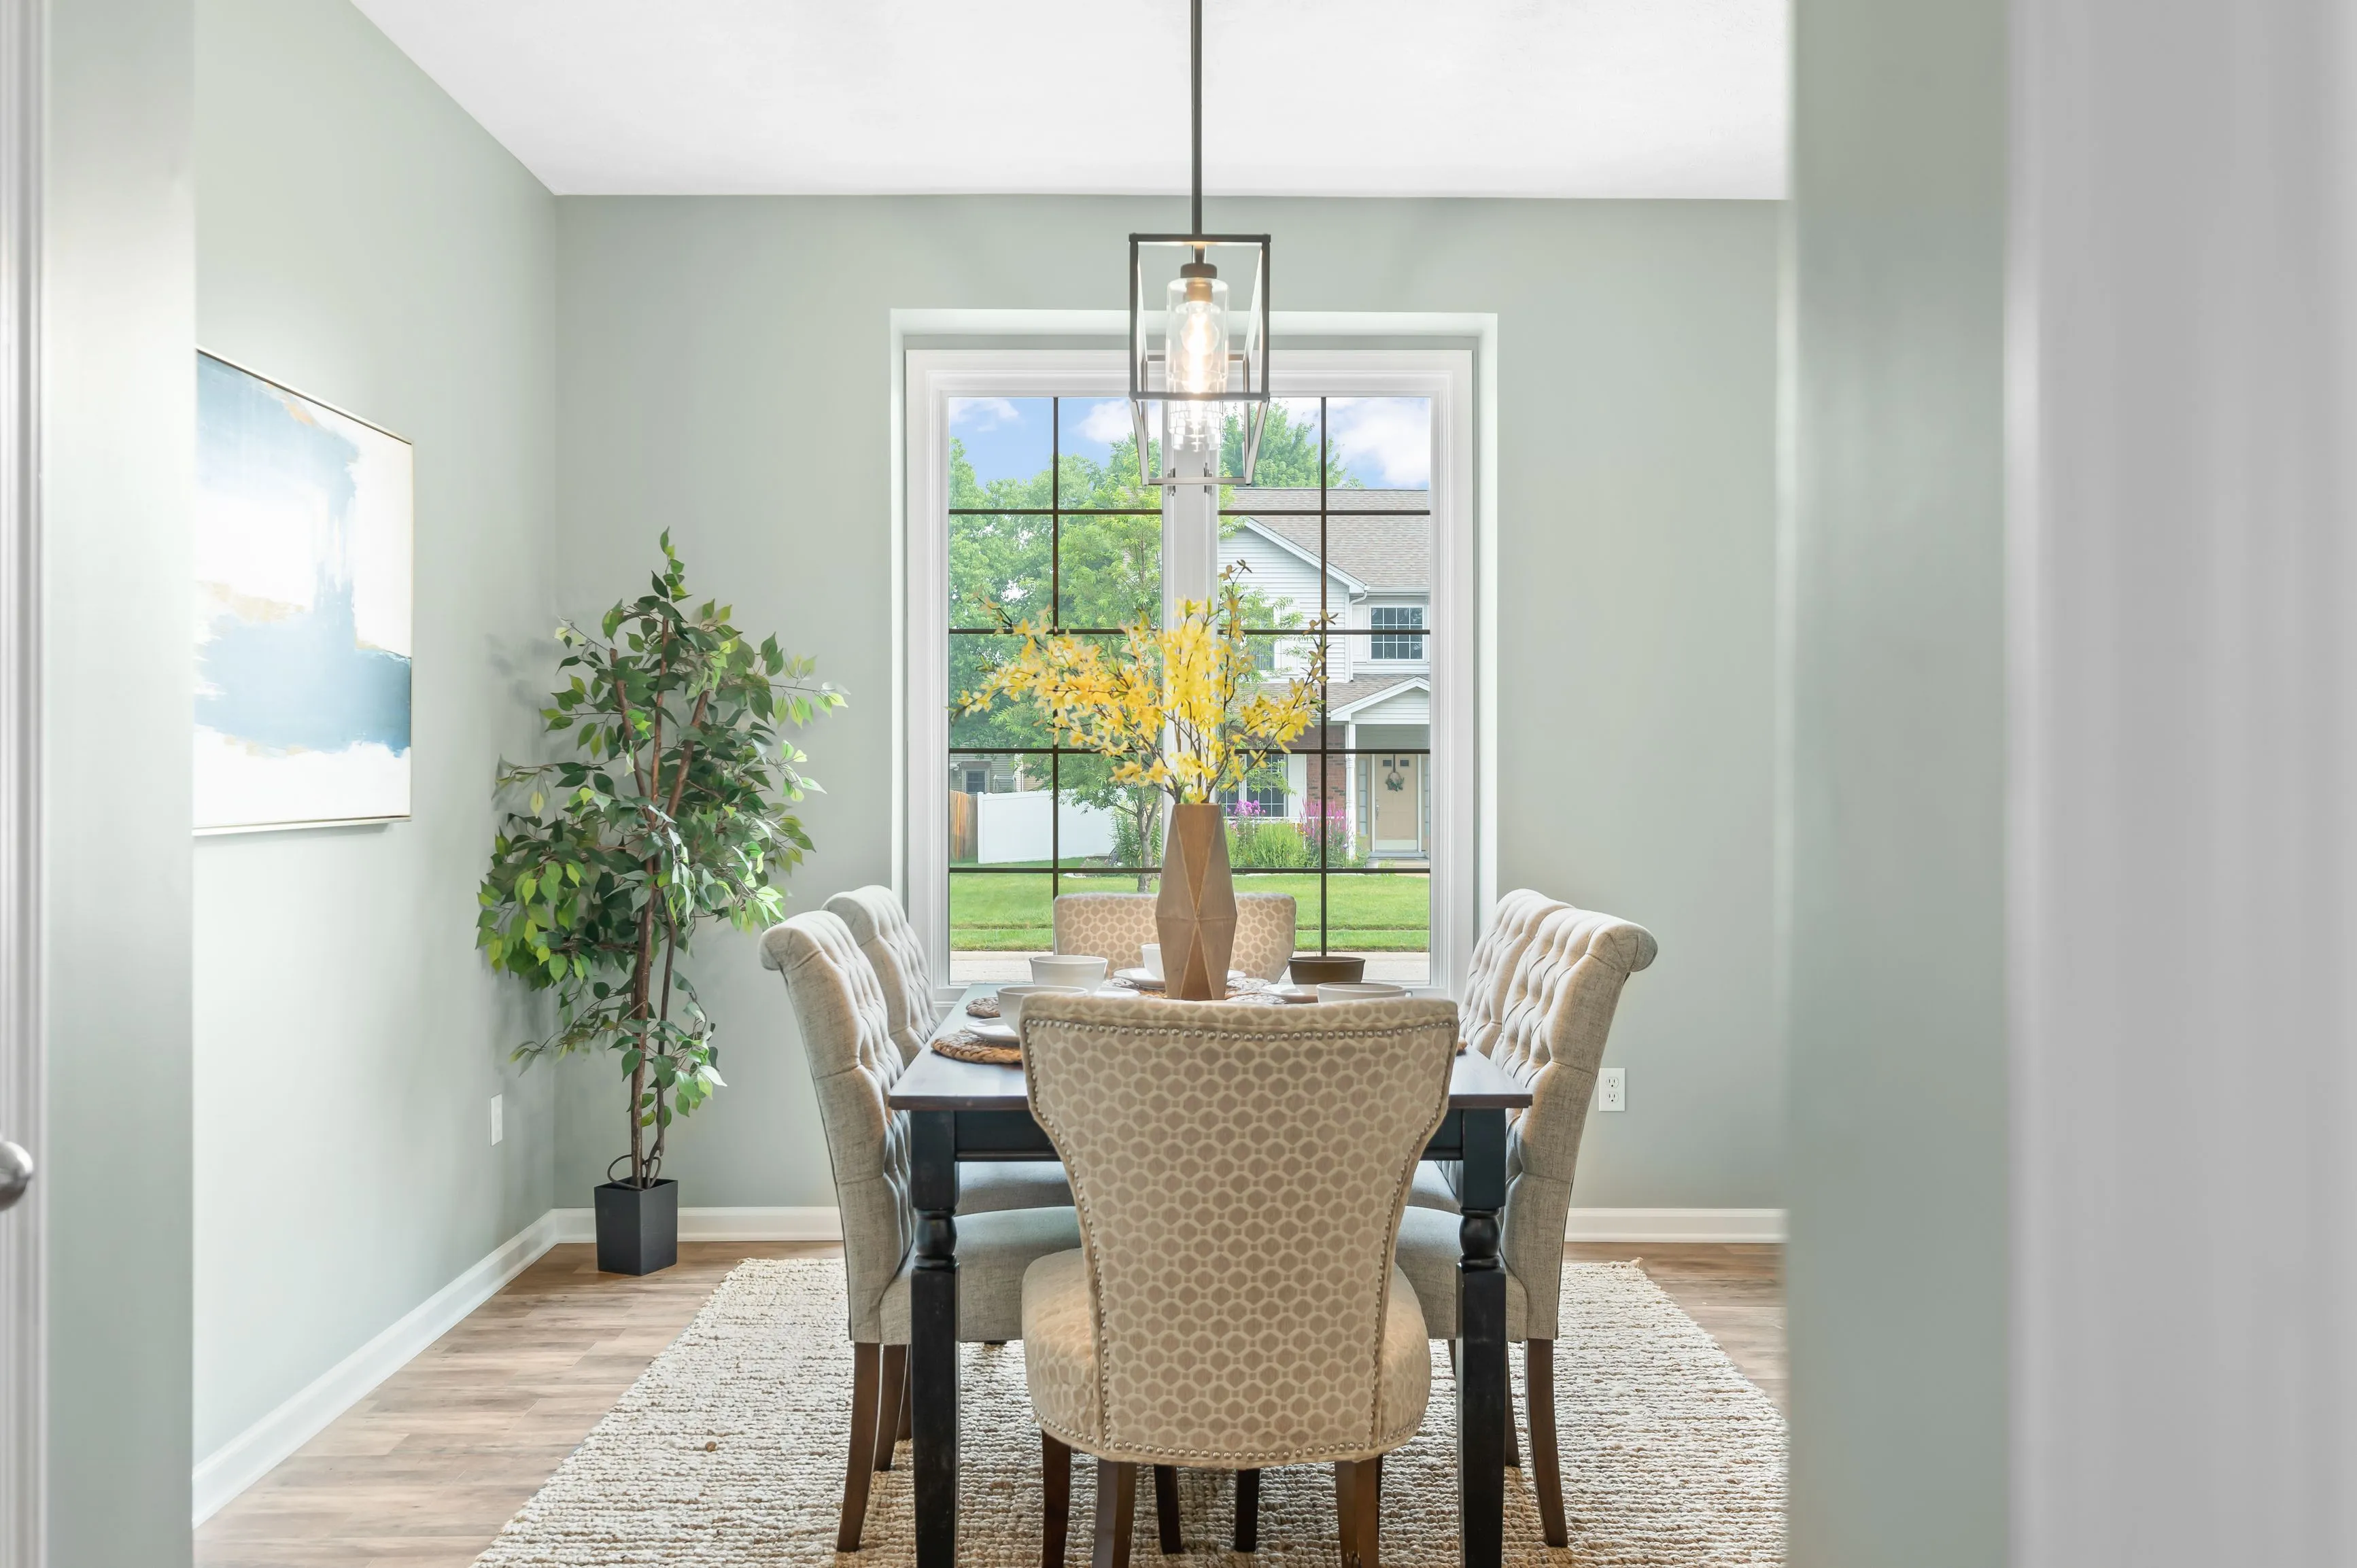 Elegant dining room interior with a table set for four, pendant light, and a view of the backyard through large windows.